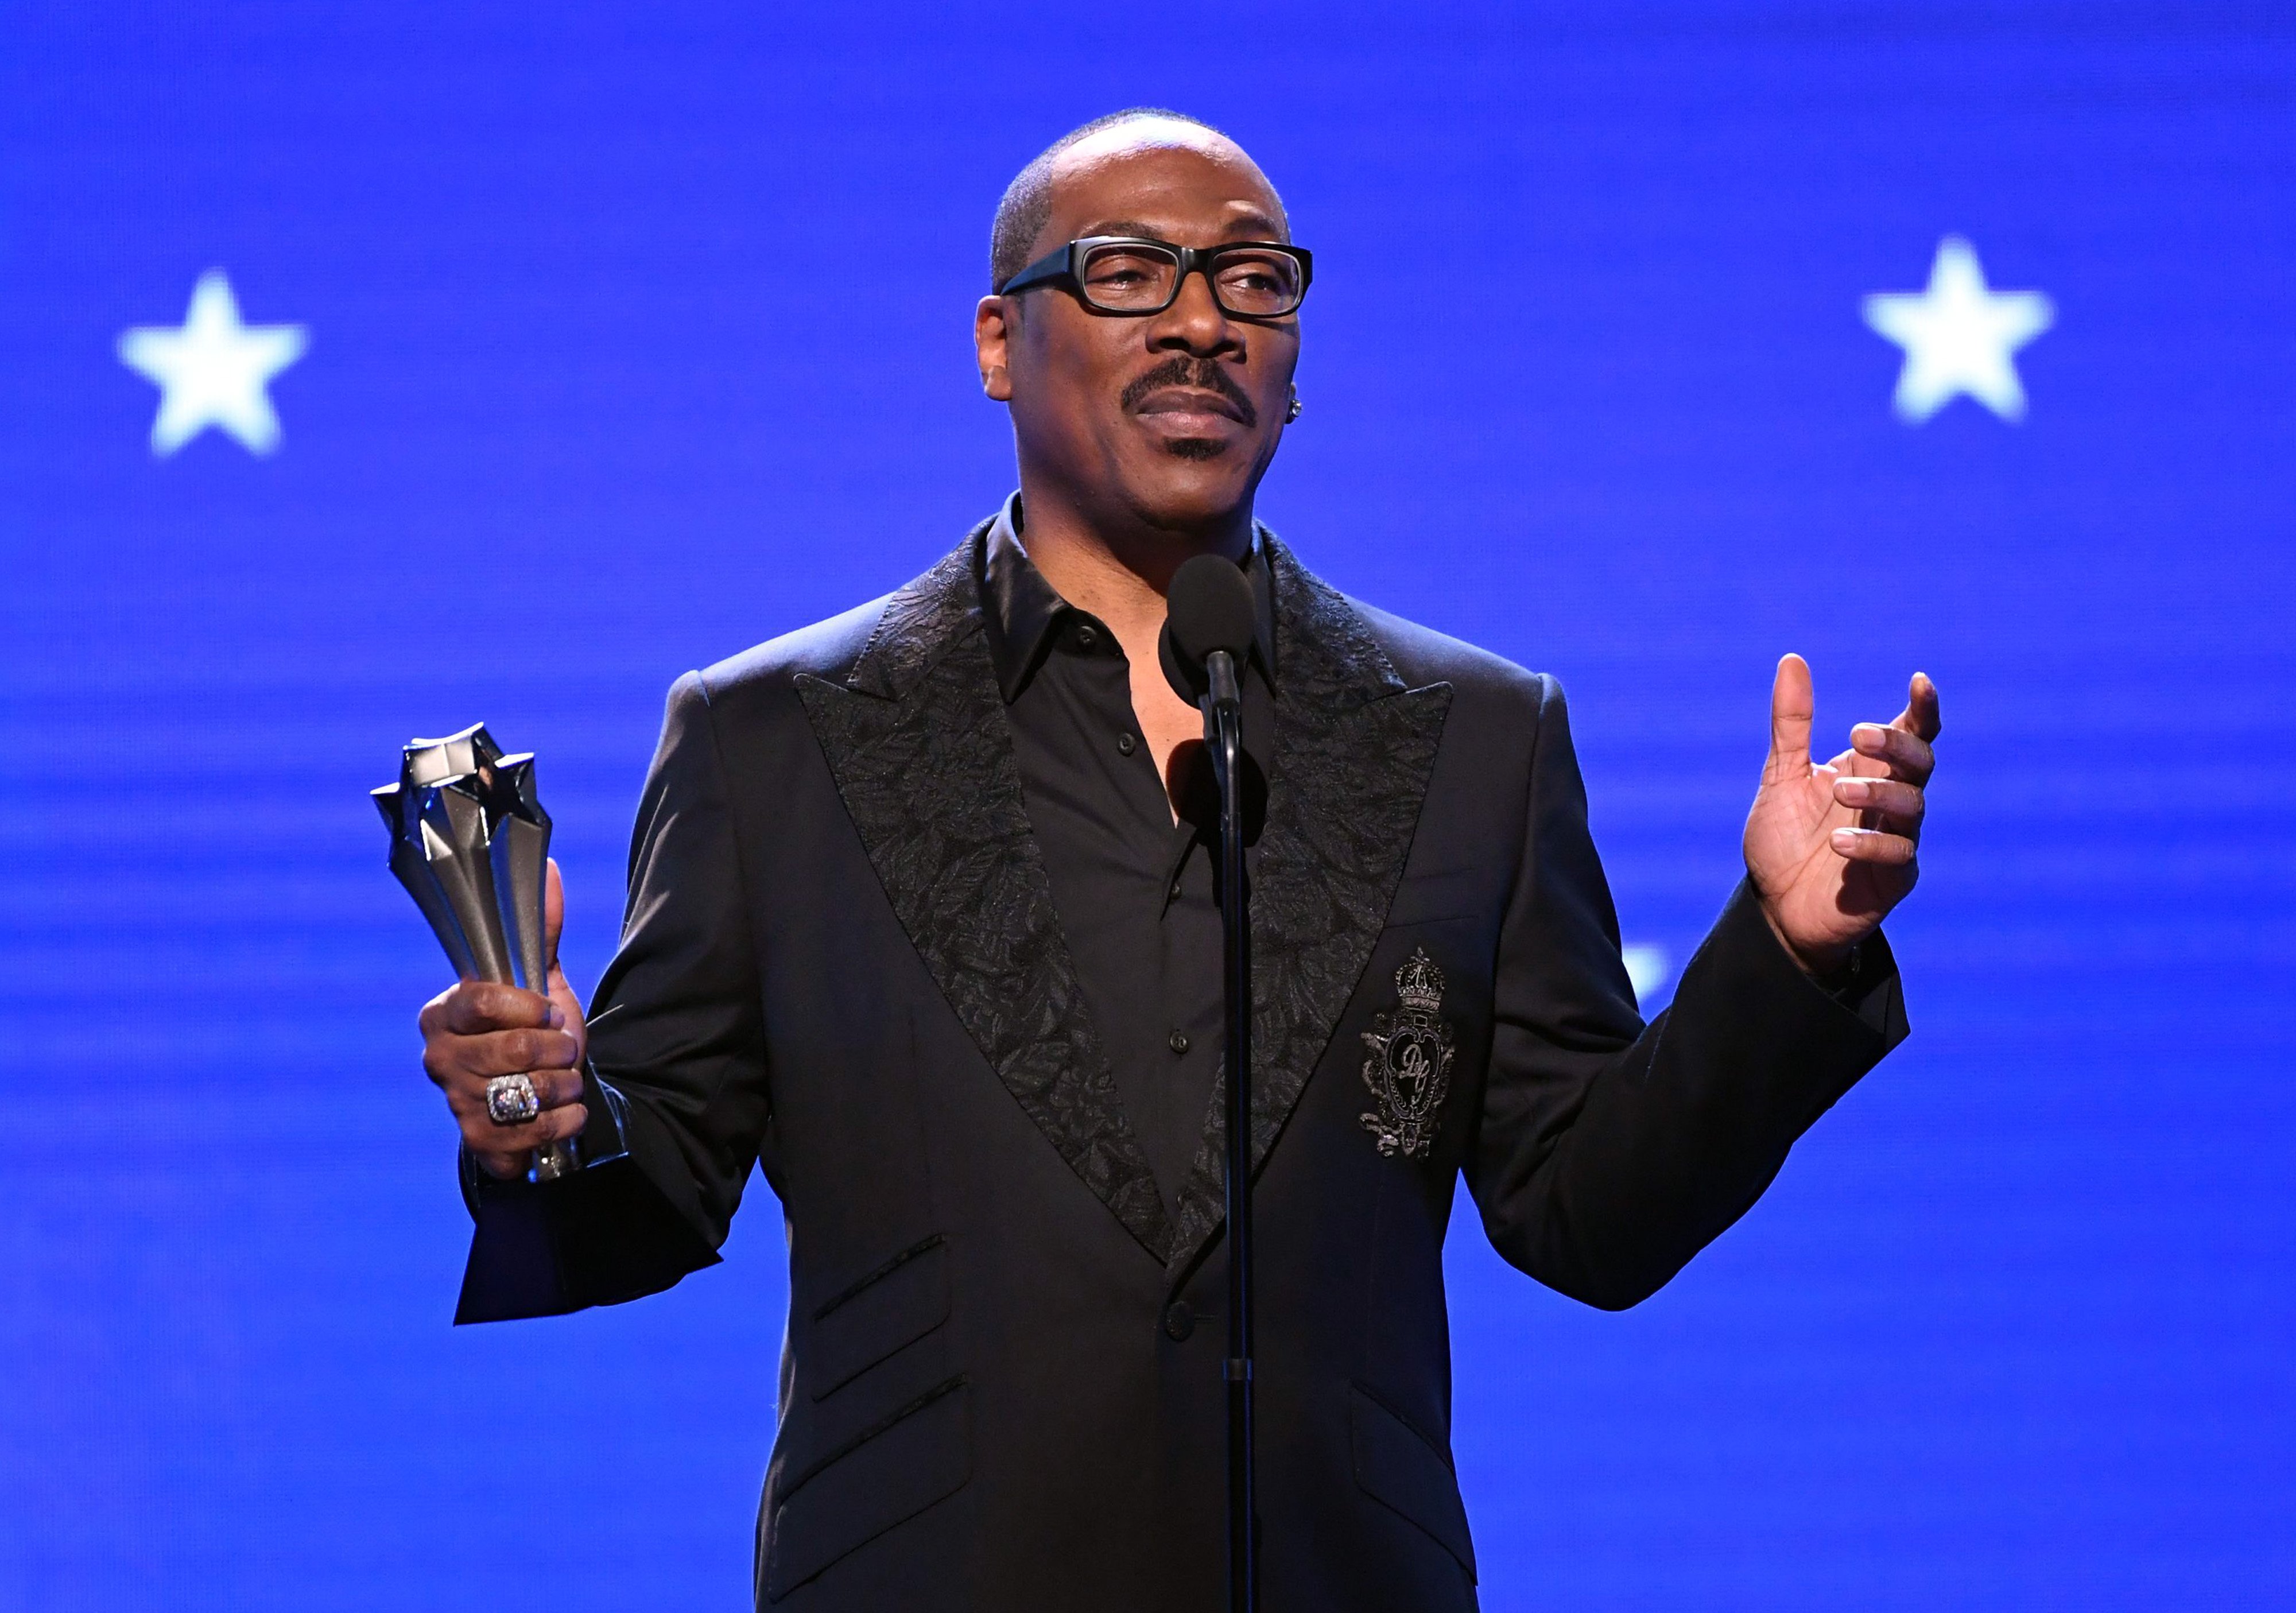 Eddie Murphy accepts the Lifetime Achievement Award onstage during the 25th Annual Critics' Choice Awards at Barker Hangar on January 12, 2020, in Santa Monica, California. | Source: Getty Images.